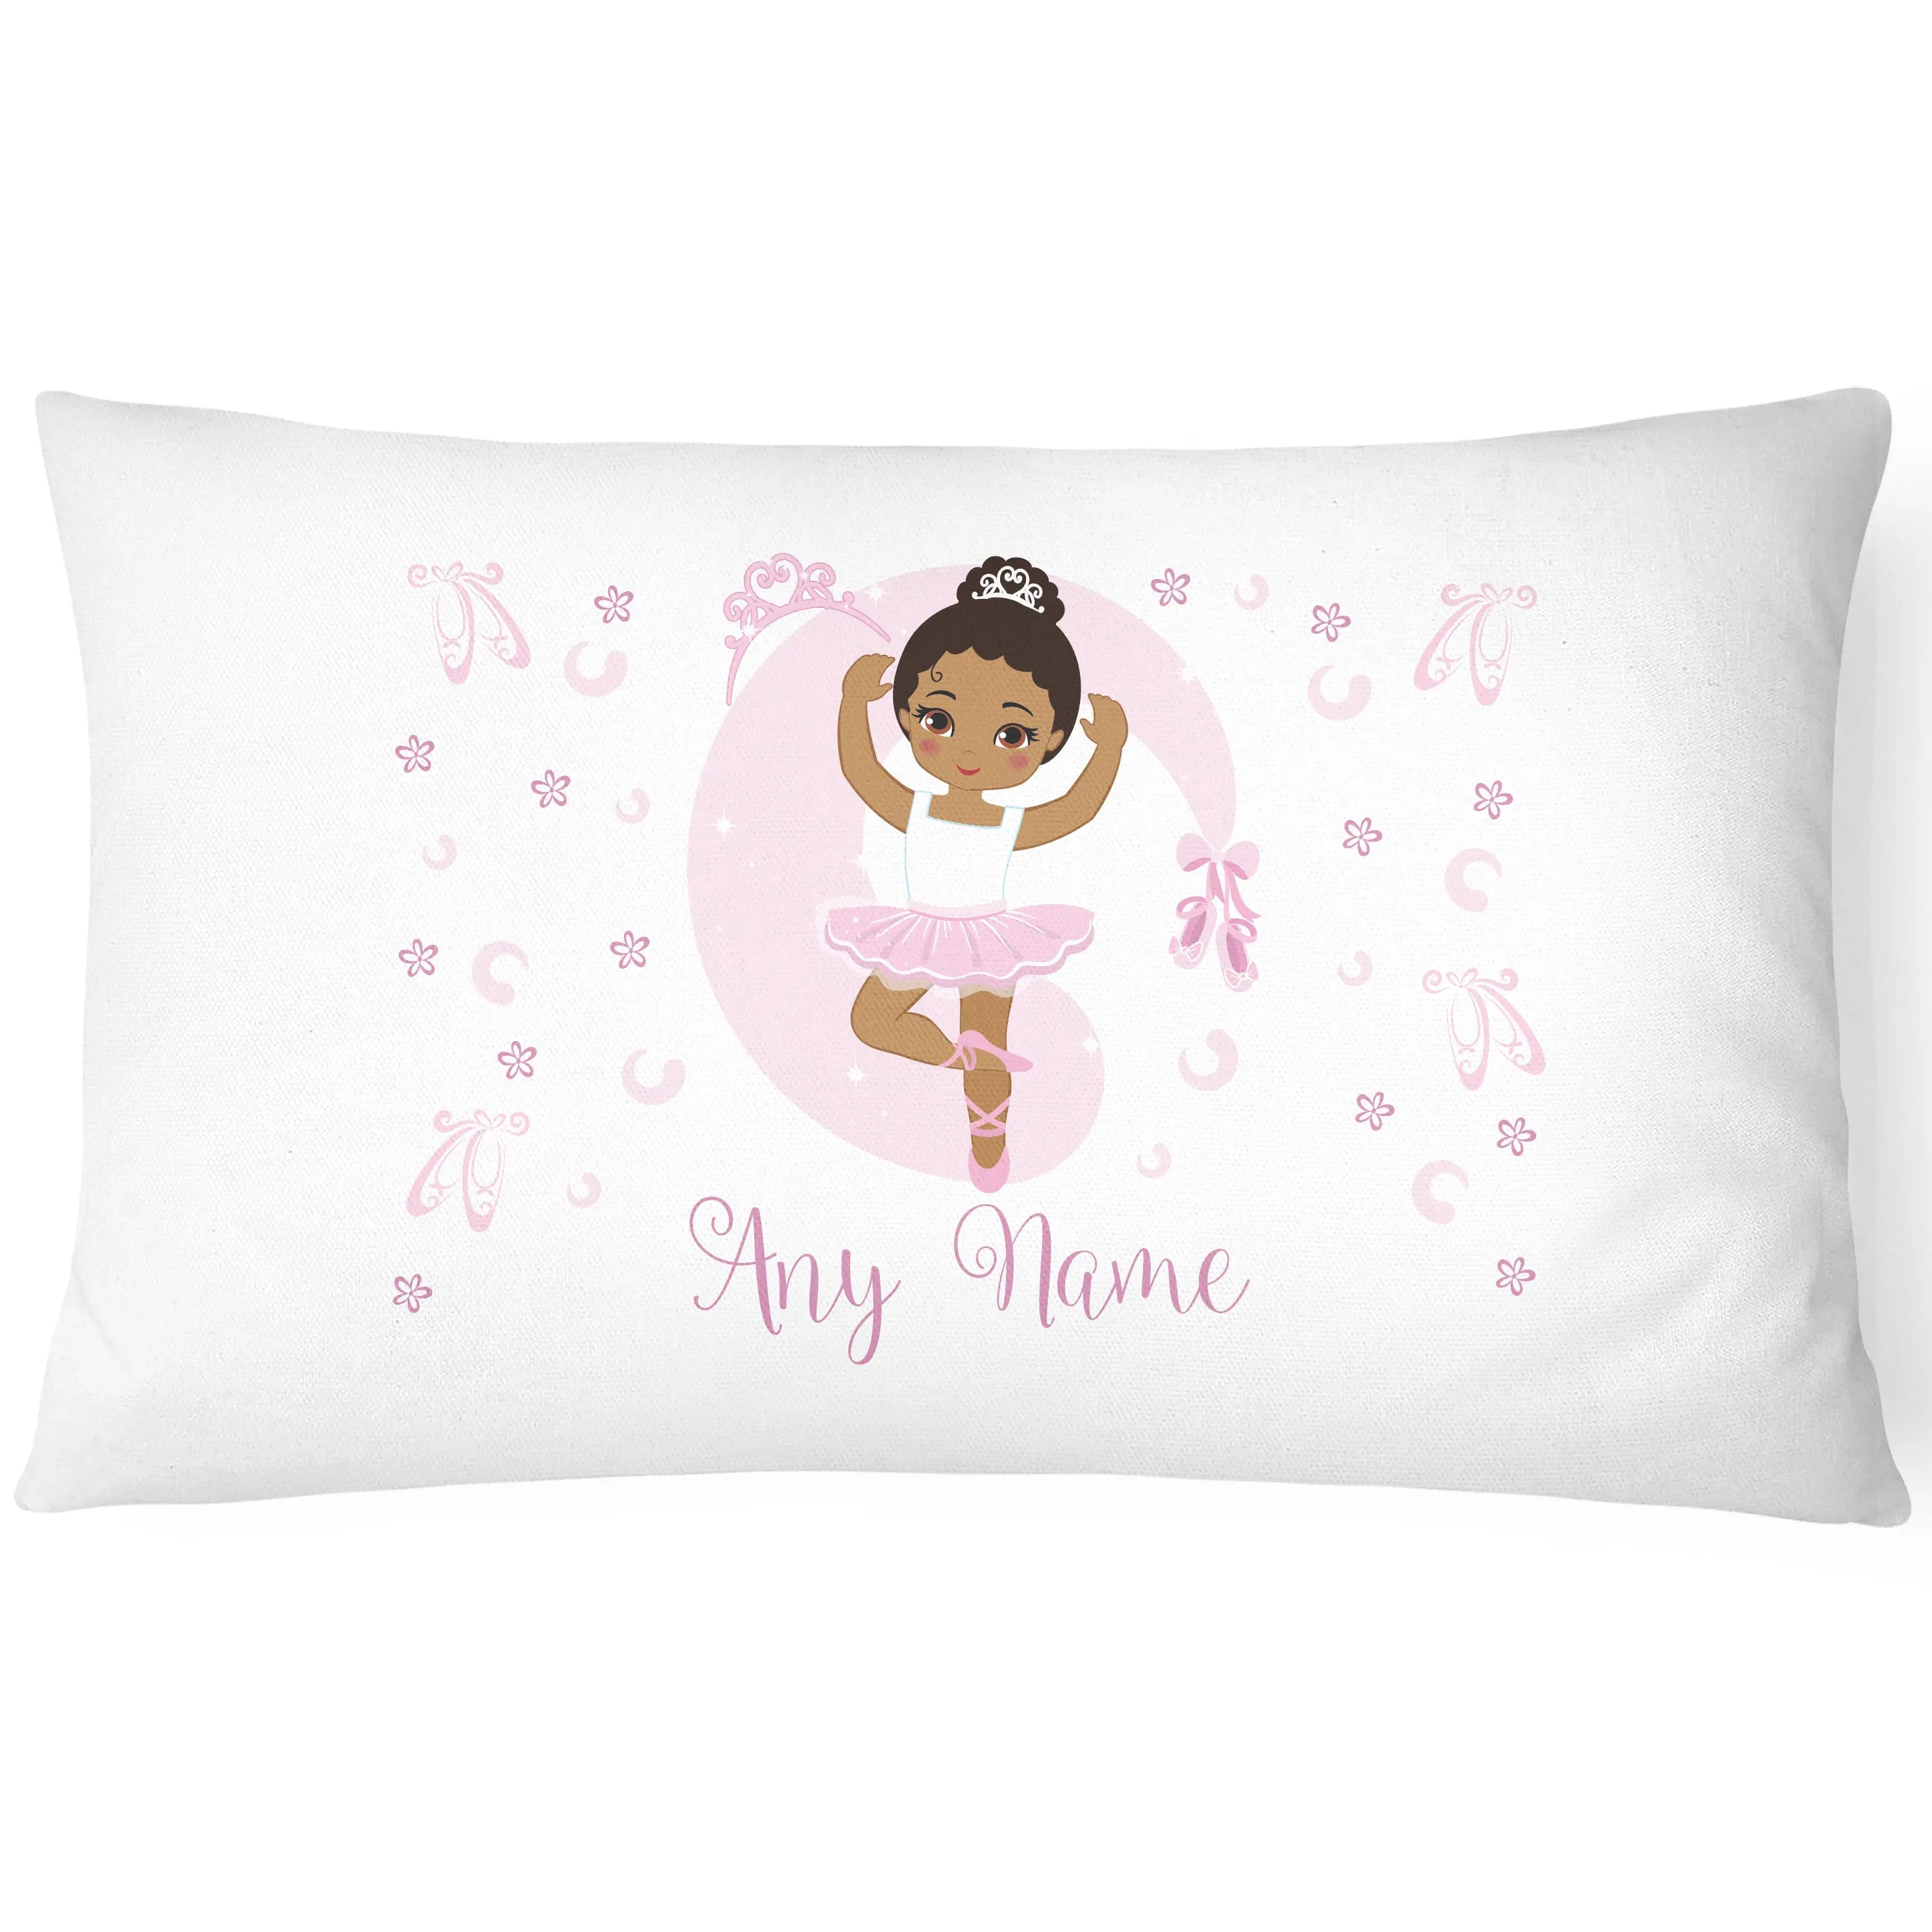 Ballerina Children's Pillowcase - Personalise with Any Name - Ballet - CushionPop